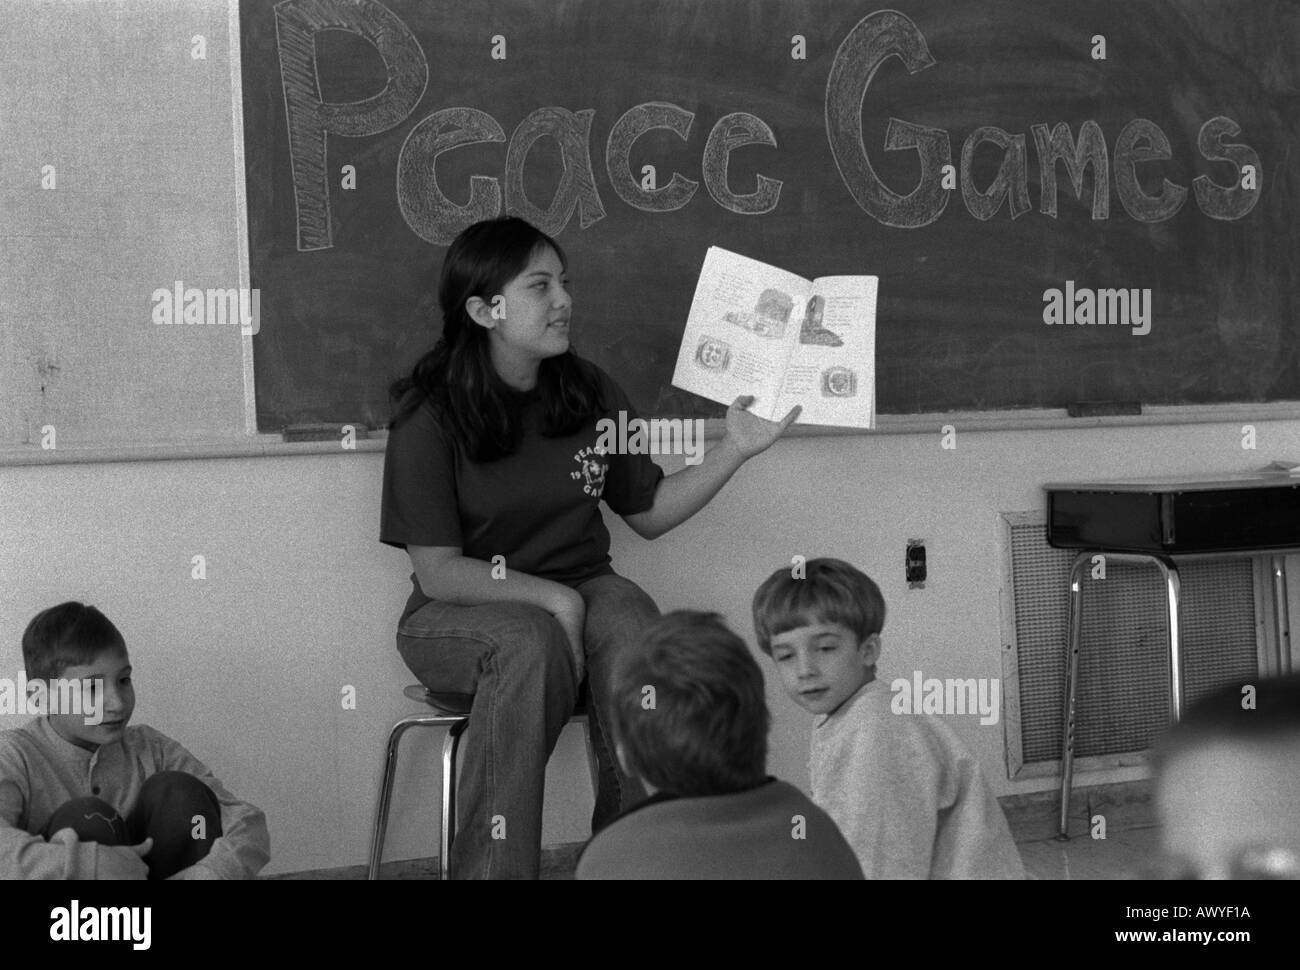 Peacegame s volunteer in first grade classroom with tudents Stock Photo